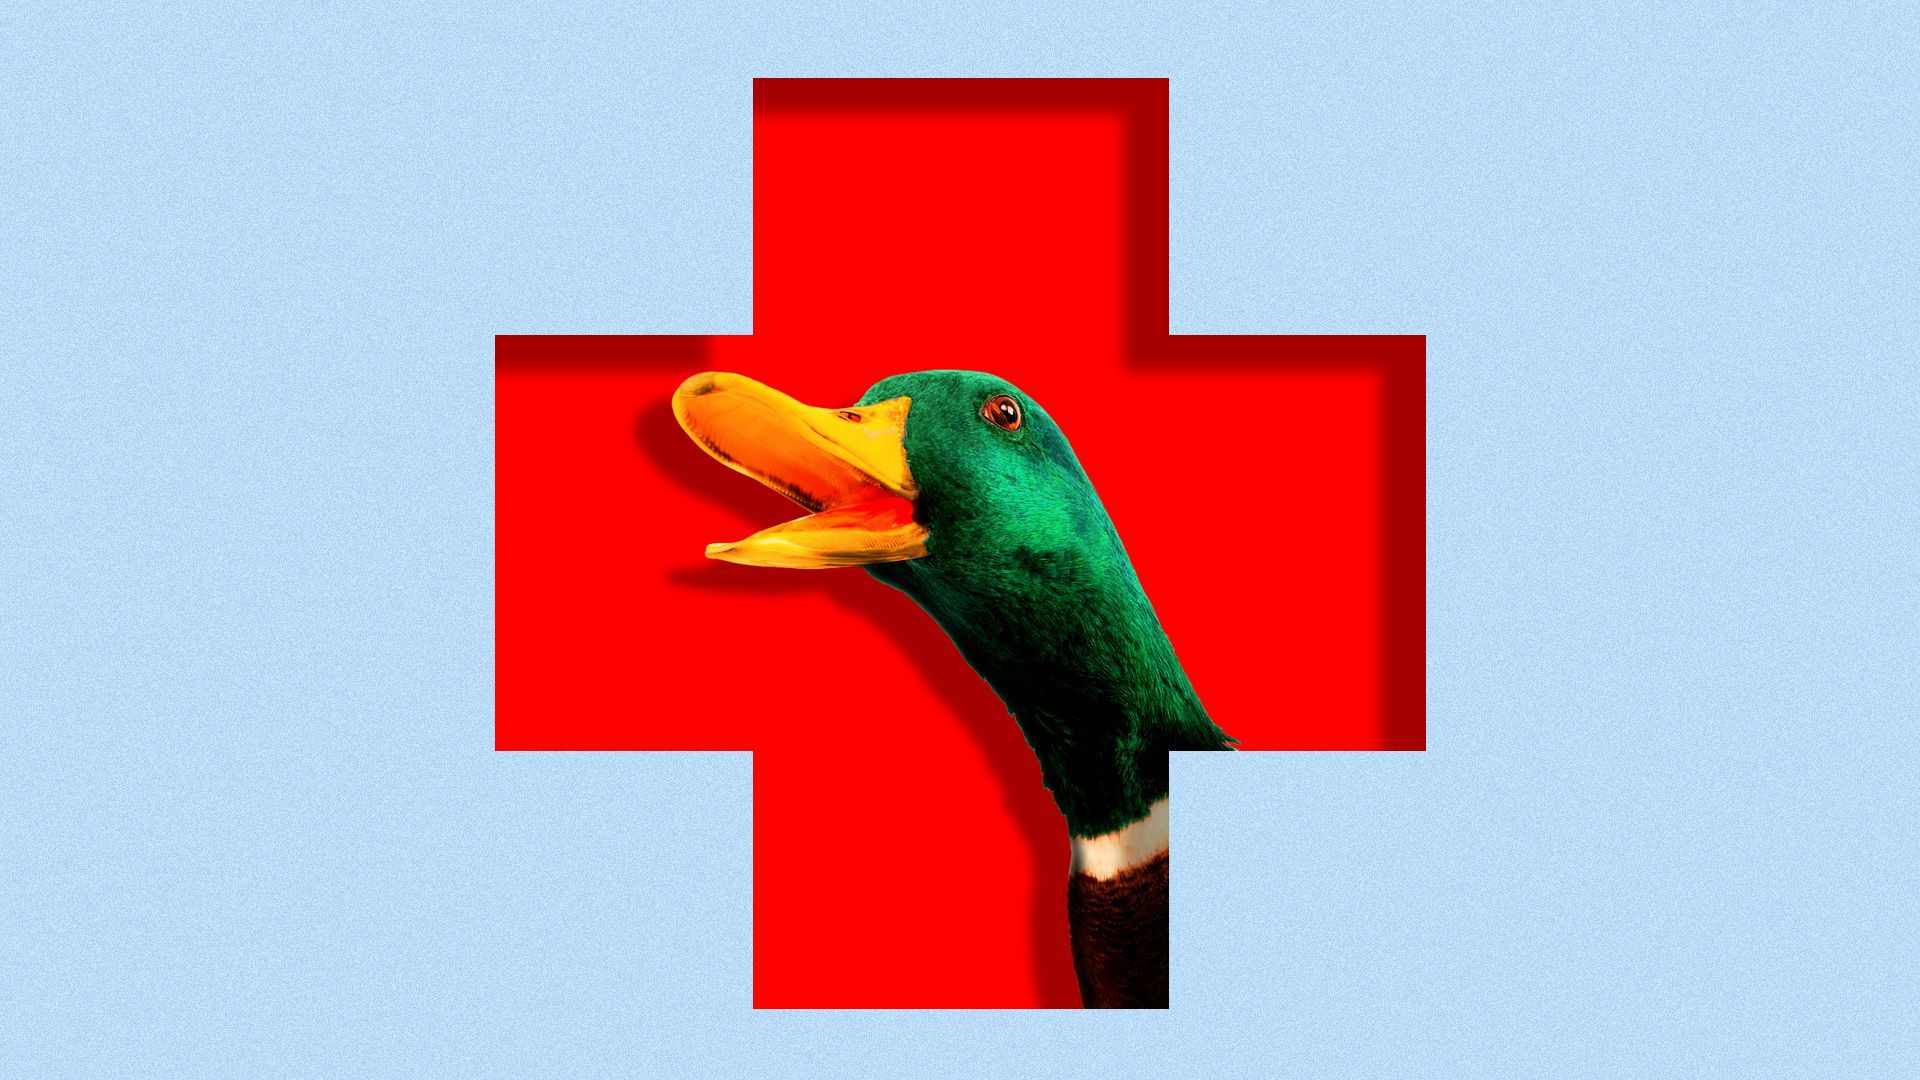 Illustration of red cross shape with a duck peaking out